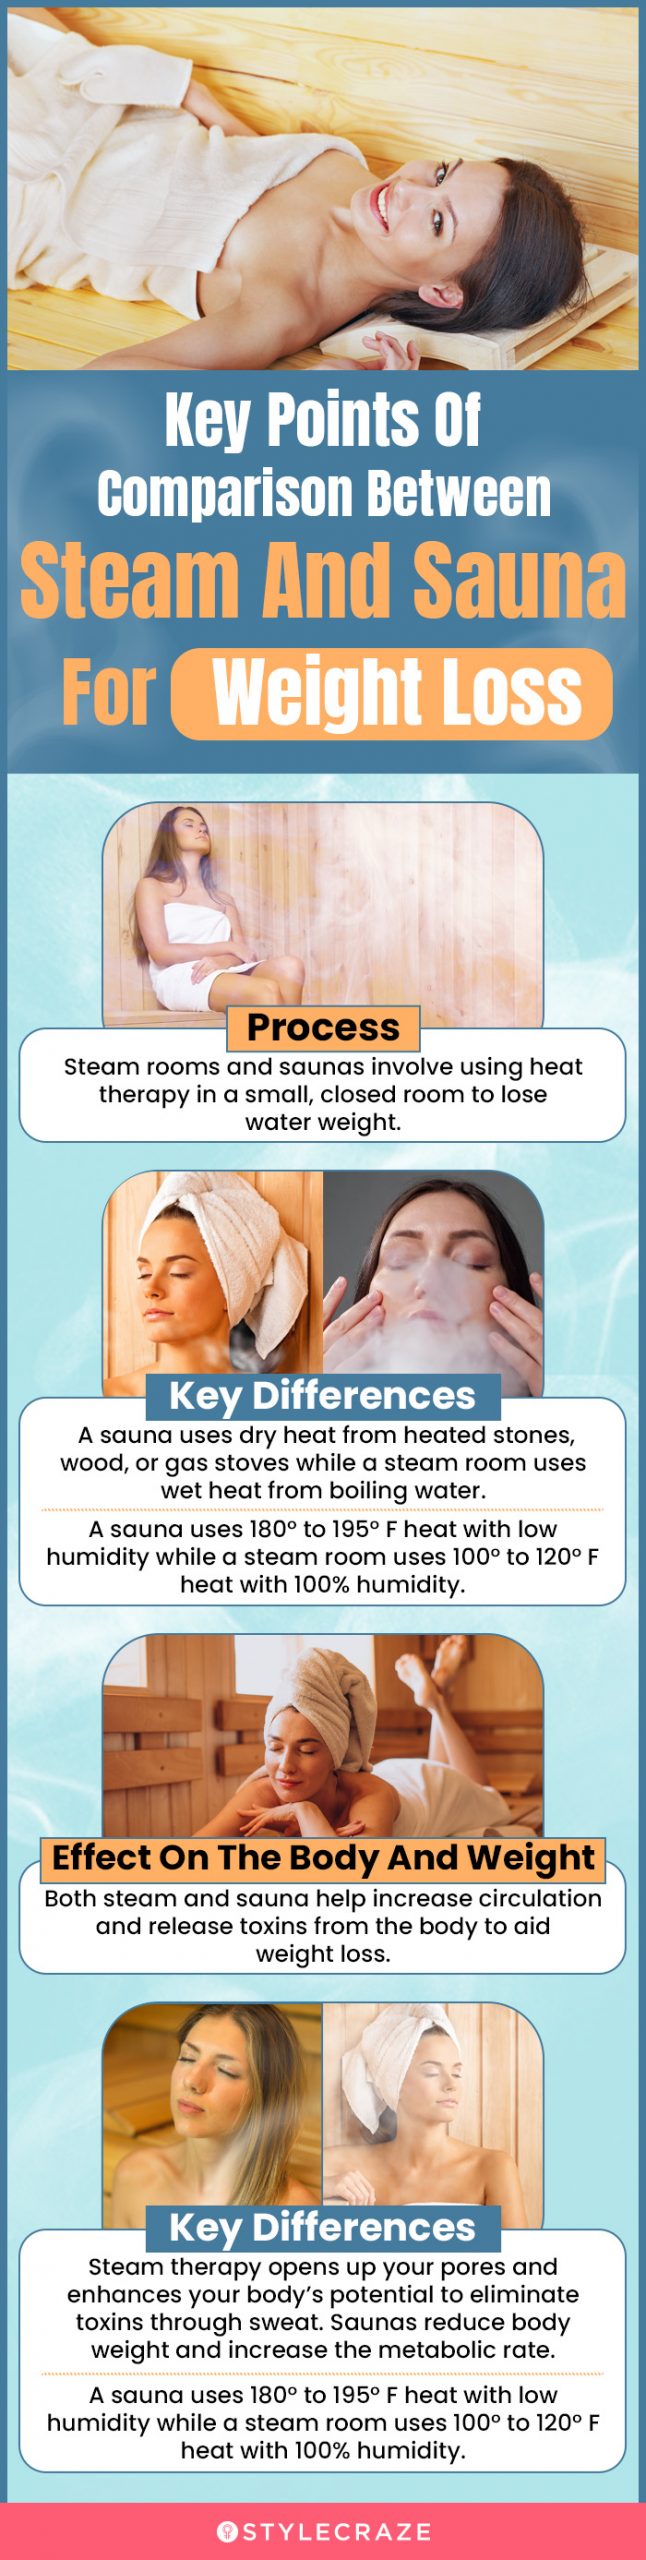 key points of comparison between steam and sauna for weight loss (infographic)